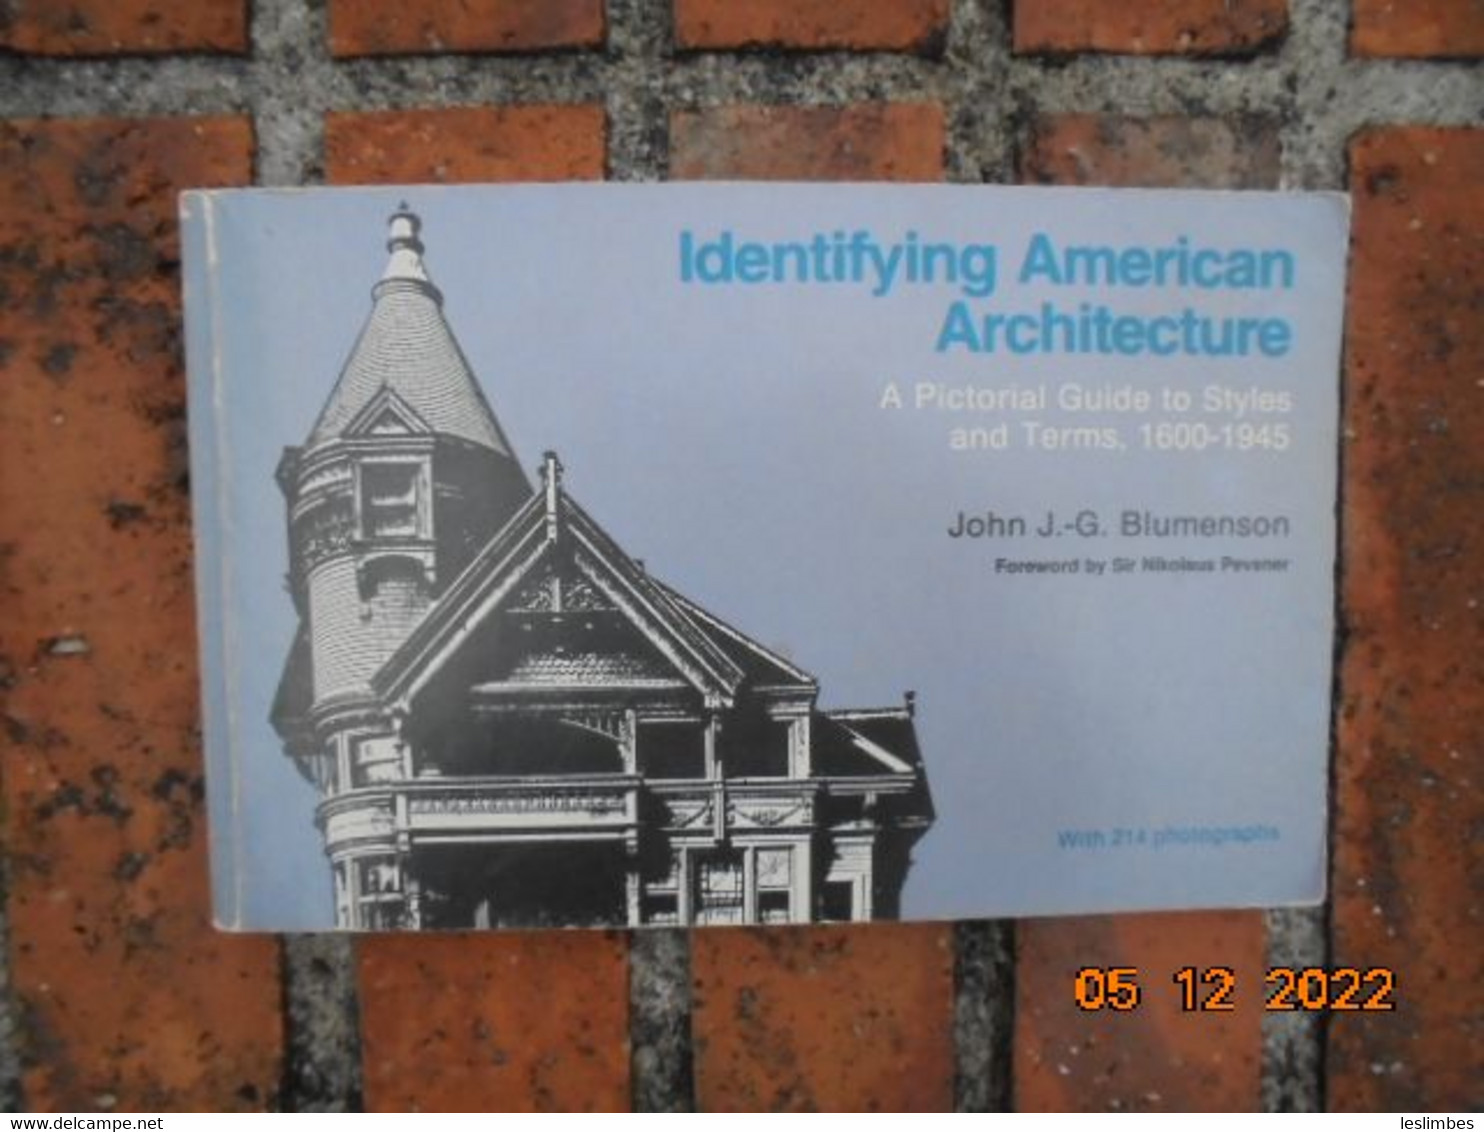 Identifying American Architecture: A Pictorial Guide To Styles And Terms 1600-1945 By John J. G. Blumenson - Architecture